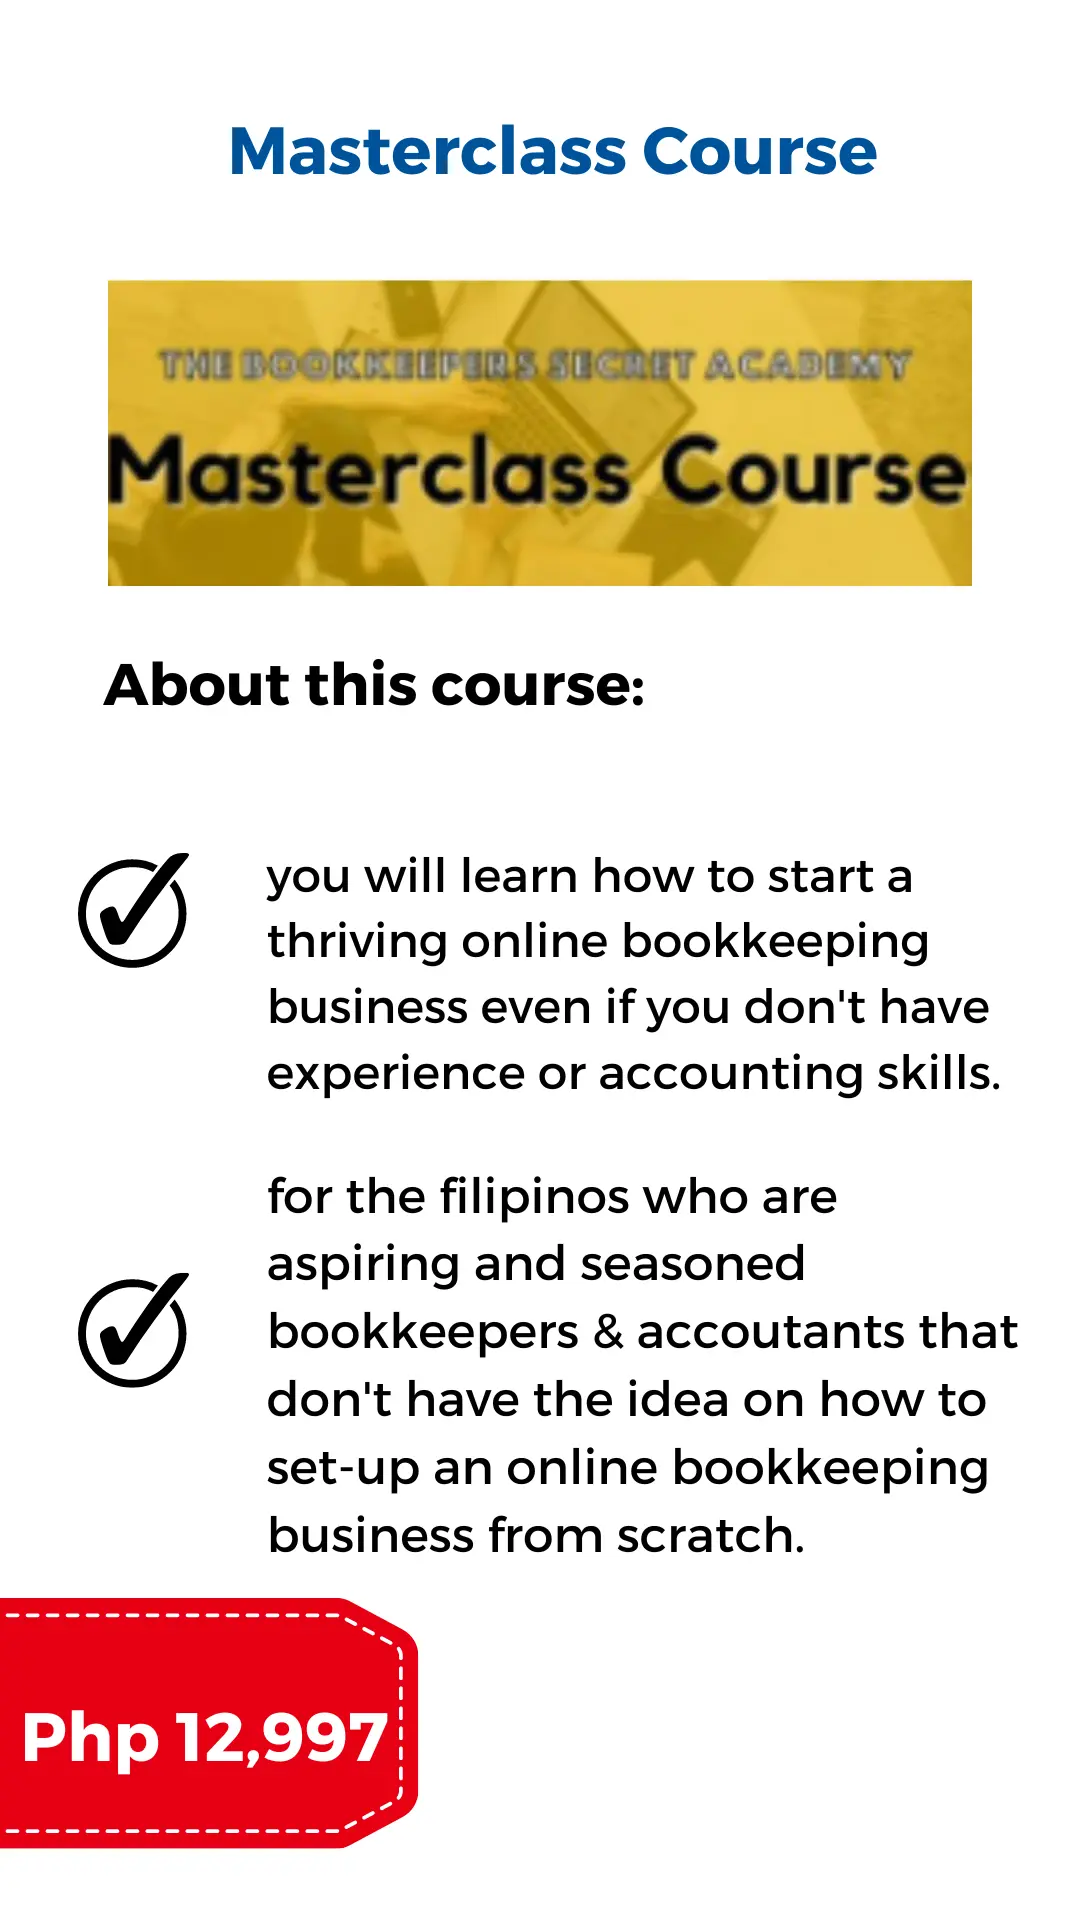 image with online course message - master class course